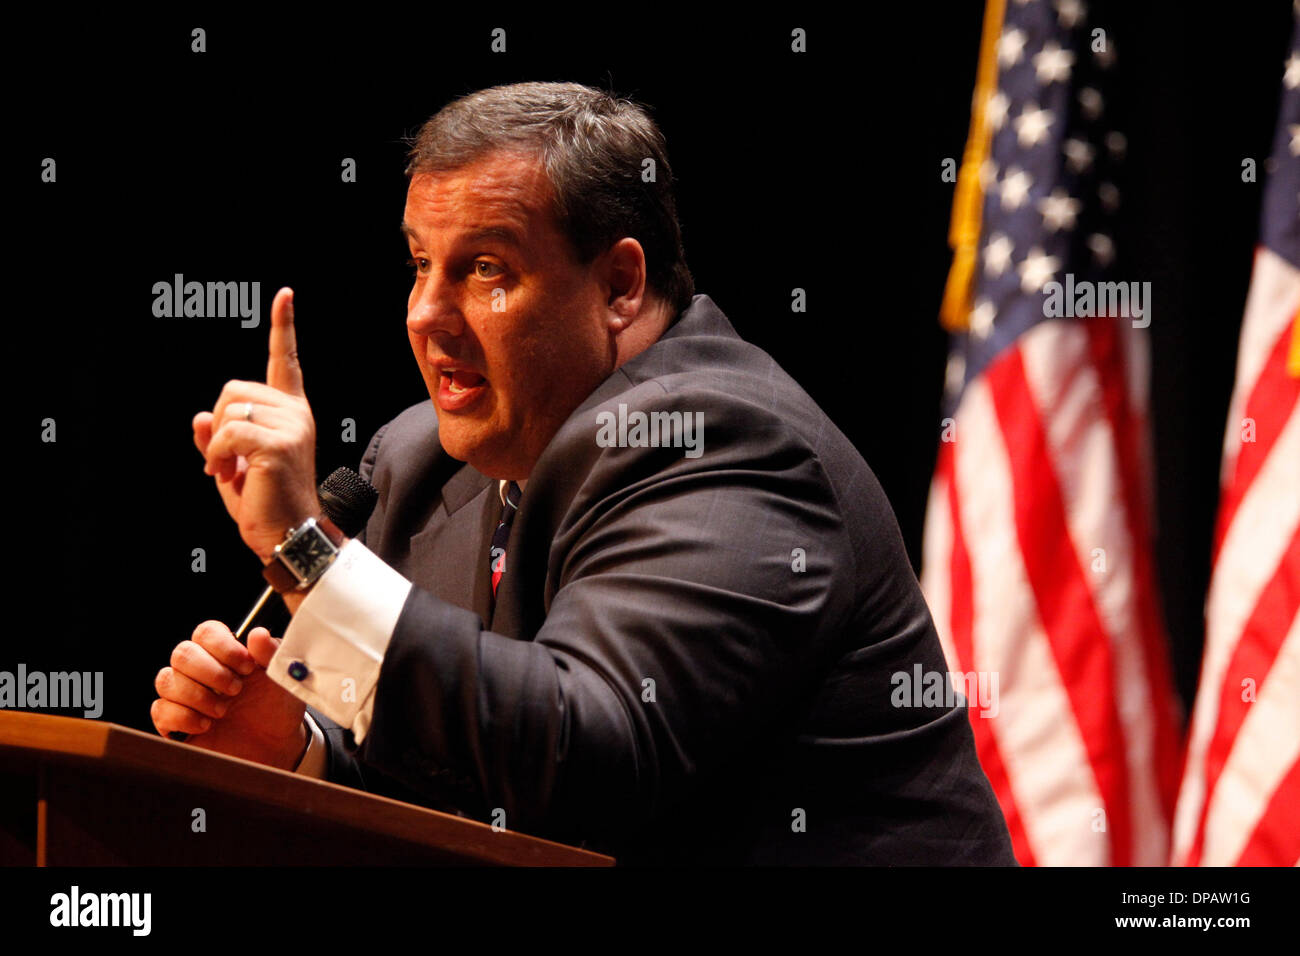 Jan. 8, 2014 - (File Photo) - New Jersey's Governor Chris Christie, the early front-runner for the 2016 Republican presidential nomination, is facing criticism after emails allegedly show that his aides conspired to create a traffic jam on the George Washington Bridge as a revenge plot against the town of a local mayor who was a political foe. PICTURED: Oct 13, 2009 - Fair Lawn, New Jersey, U.S.- US Attorney CHRIS CHRISTIE during a 'Conversation with Chris Christie' event at the Fair Lawn Community Center in New Jersey during his campaign trail as the Republican candidate for New Jersey Govern Stock Photo